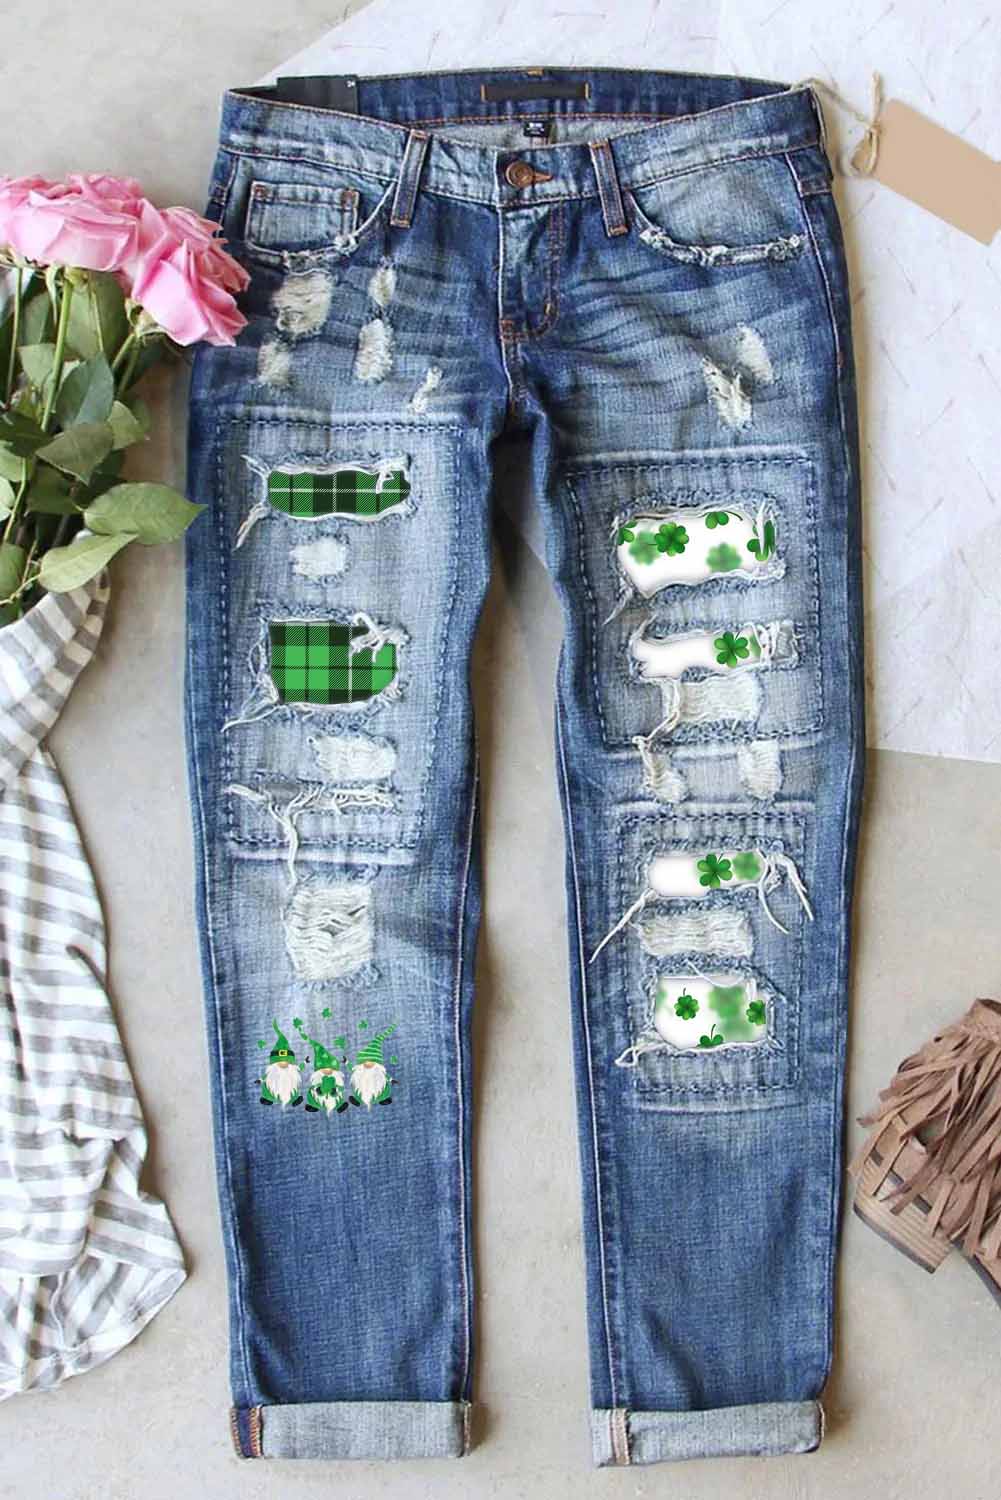 Casual Green Gnomes Lucky Shamrocks Paid Printed Ripped Denim Jeans